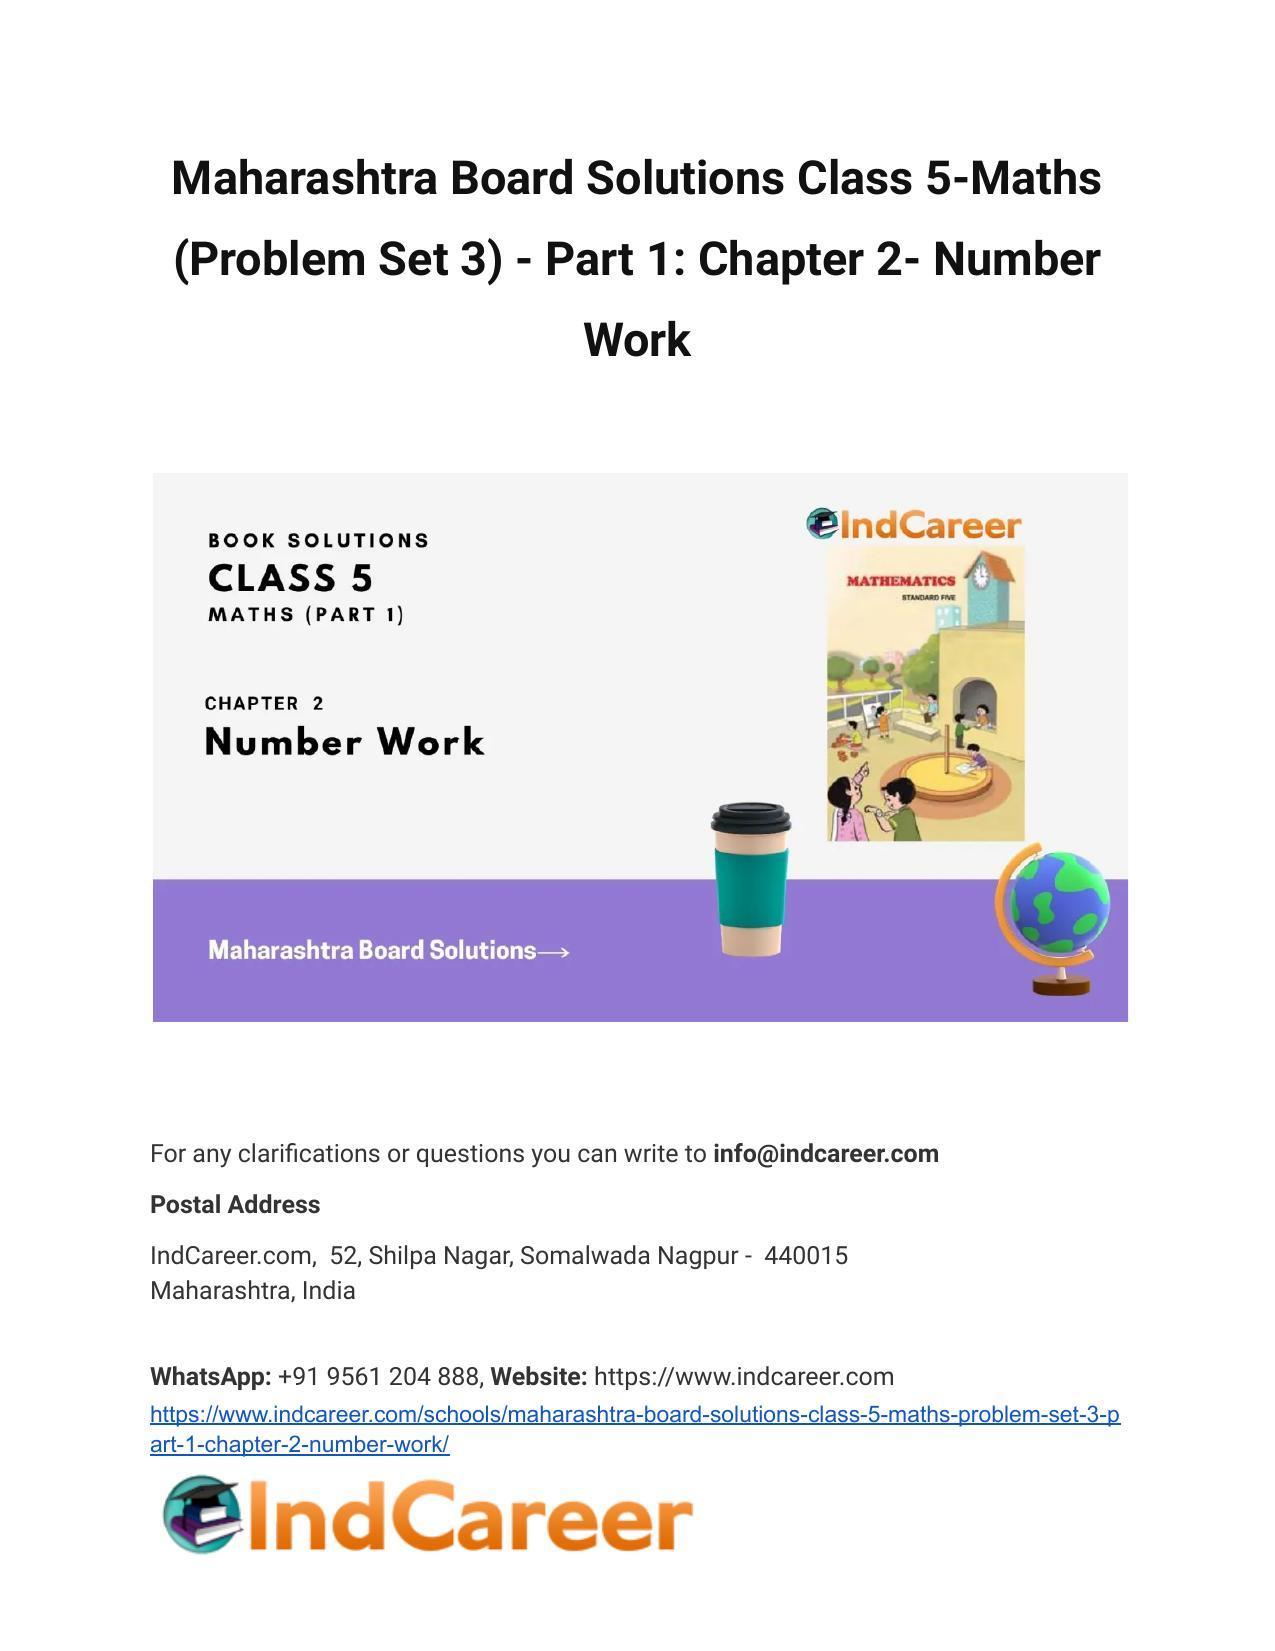 Maharashtra Board Solutions Class 5-Maths (Problem Set 3) - Part 1: Chapter 2- Number Work - Page 1